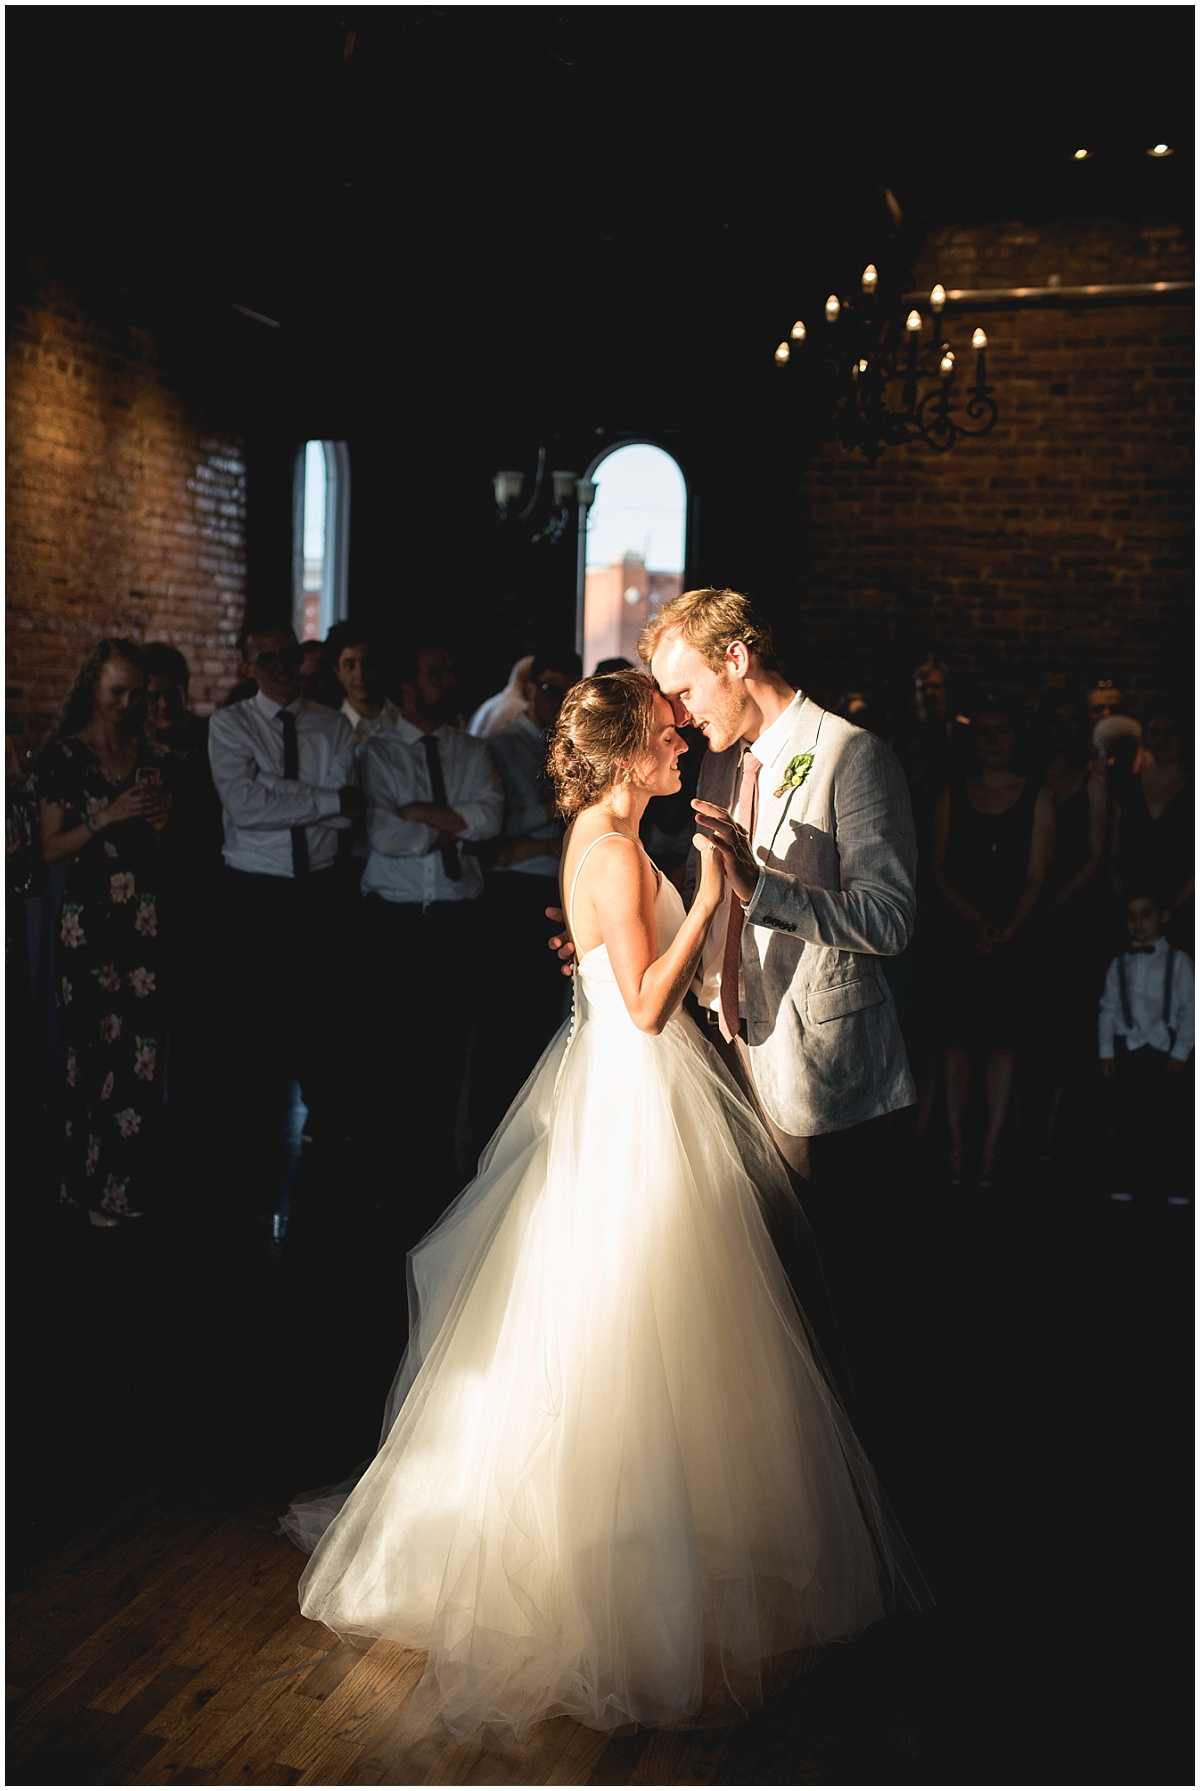 Intimate First Dance